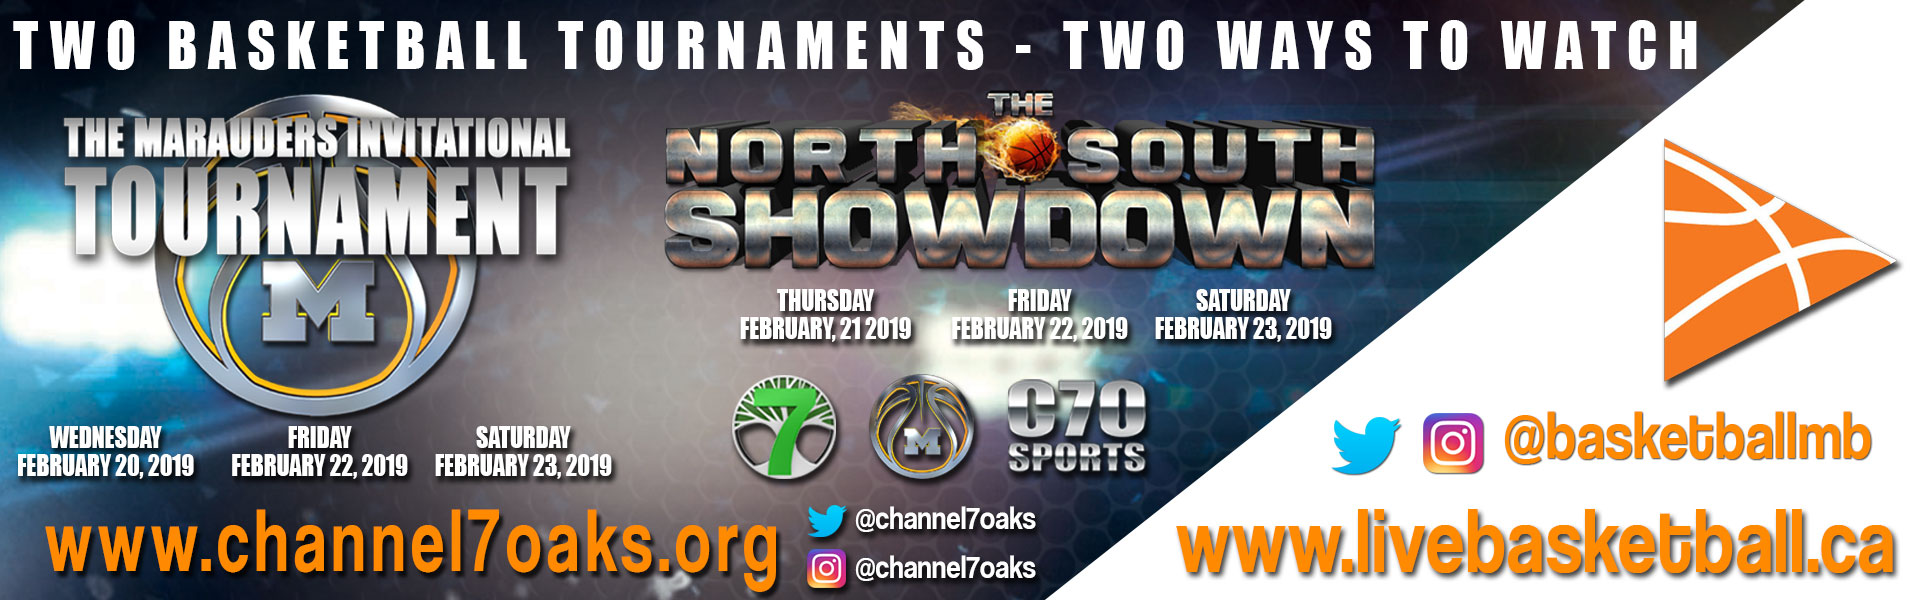 The 2019 MIT and North-South Showdown